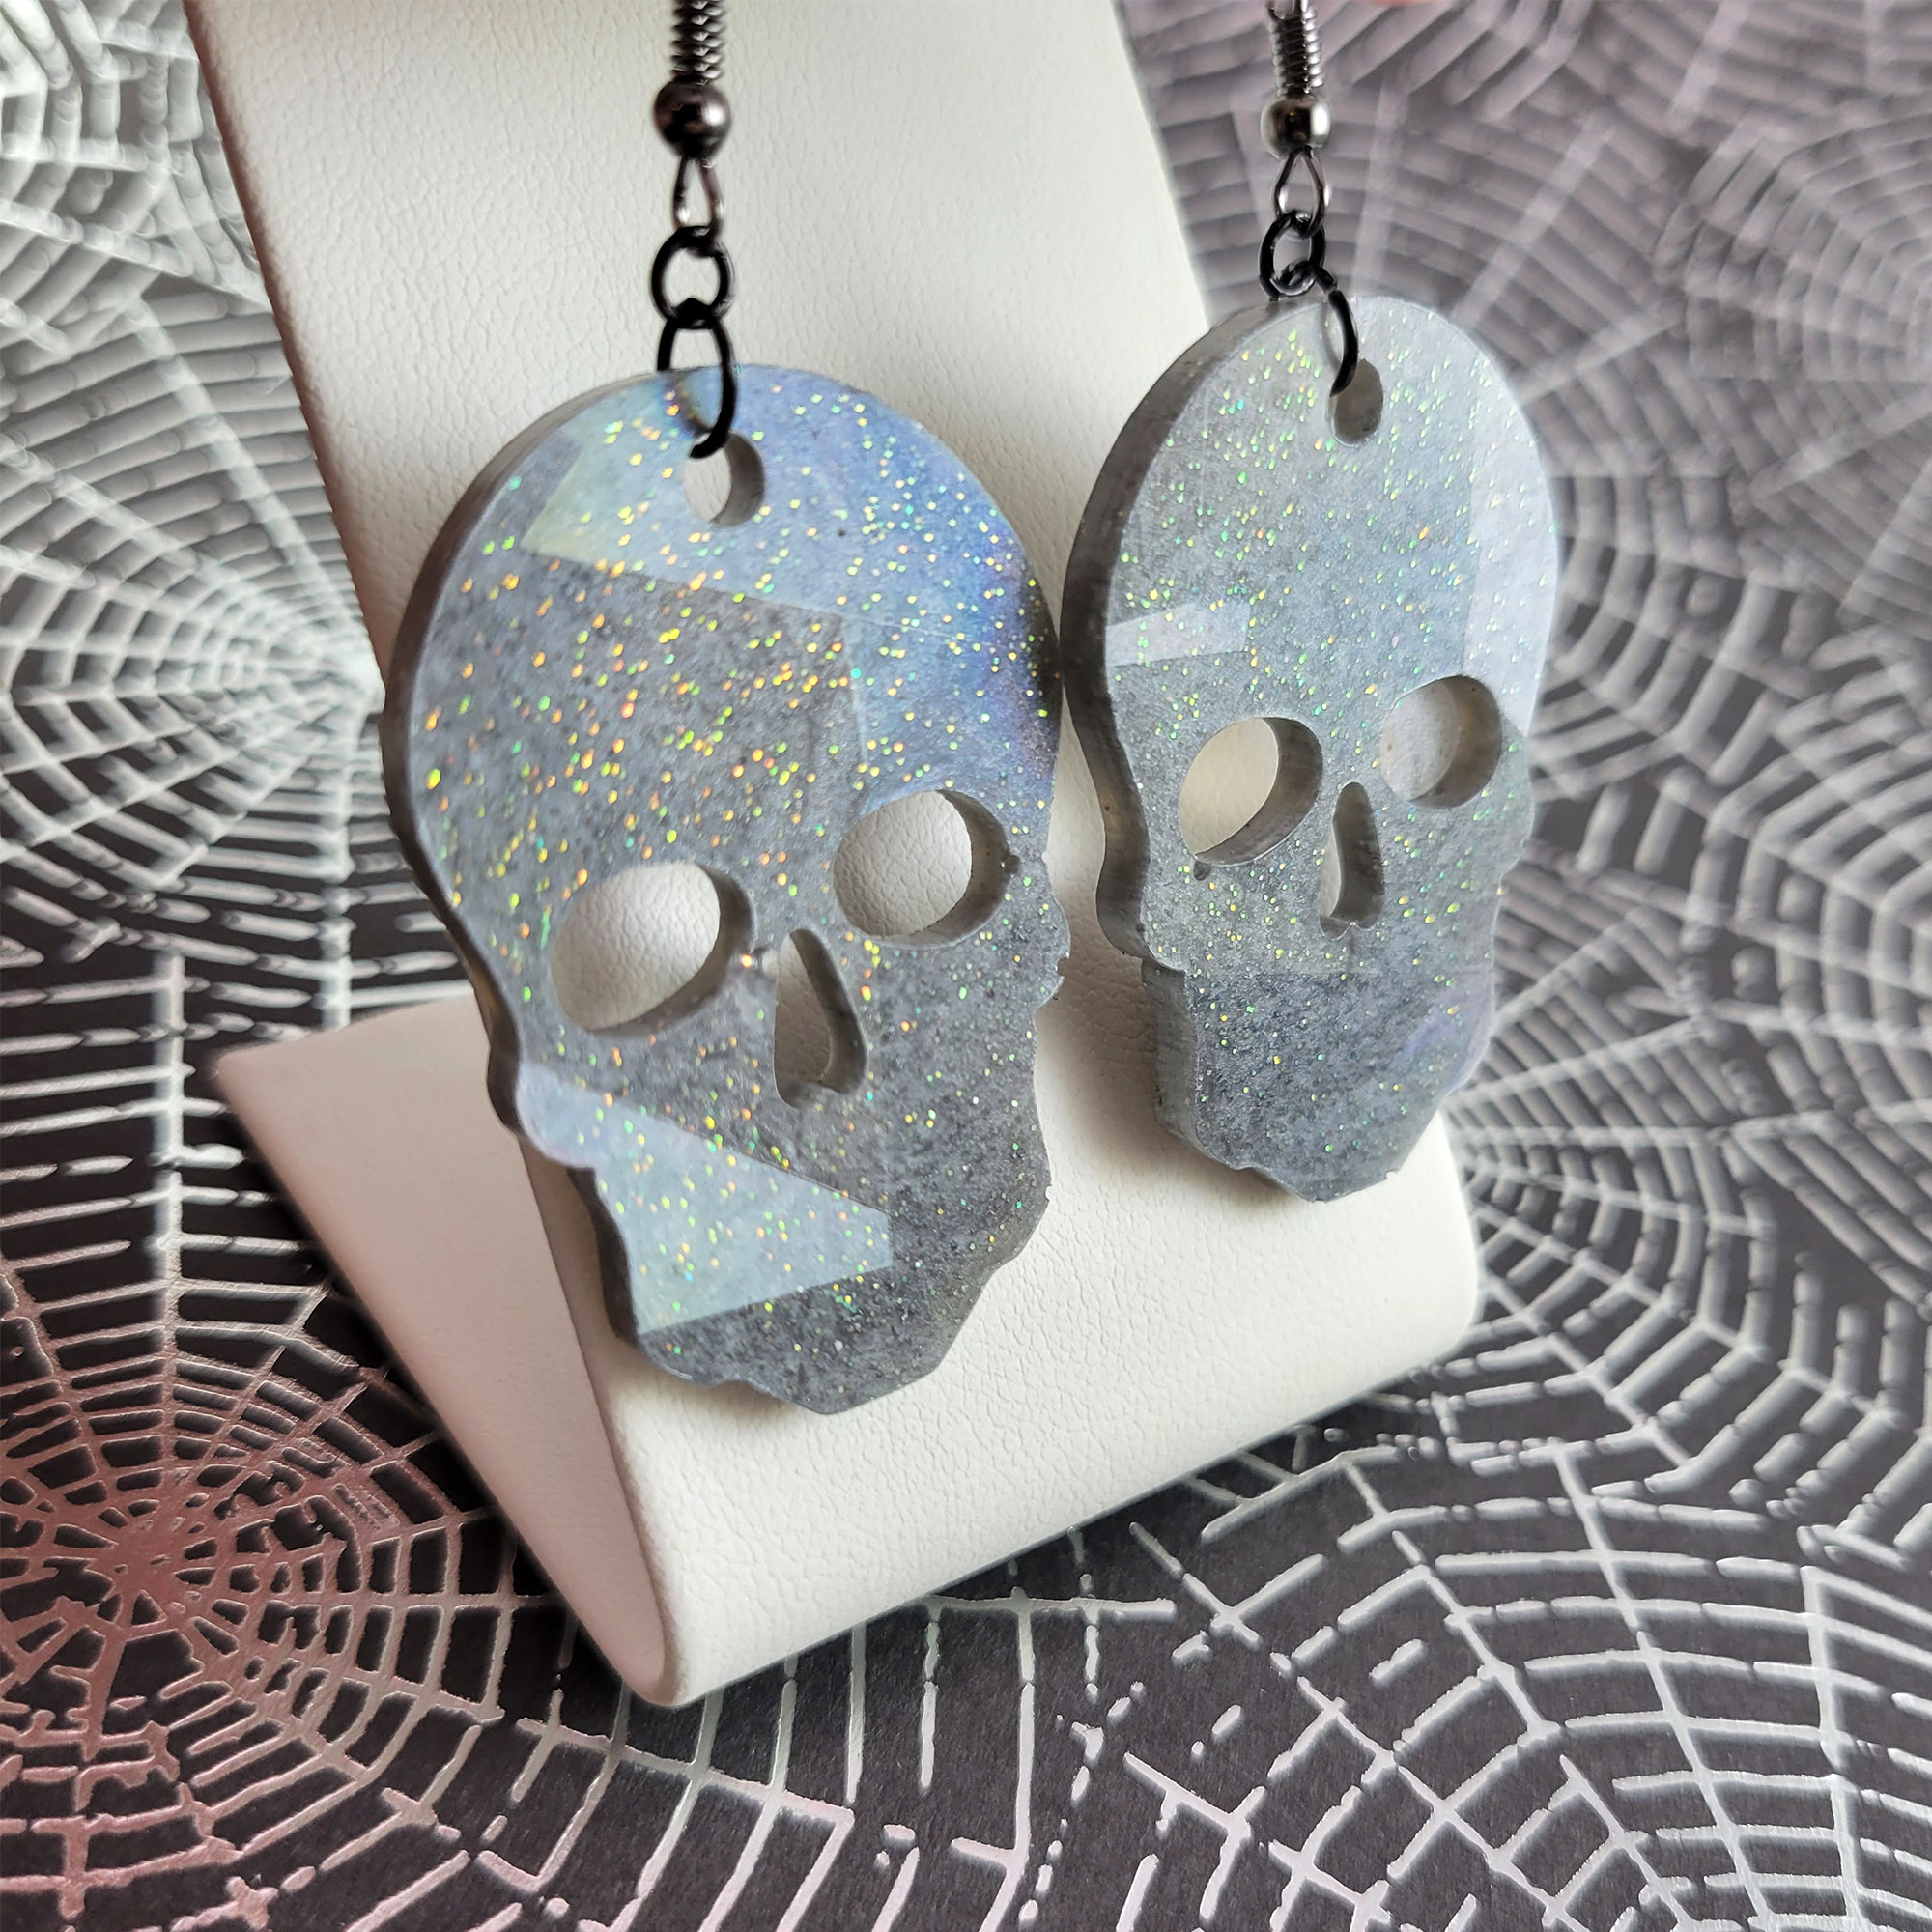 Holographic Skull Earrings by Wilde Designs